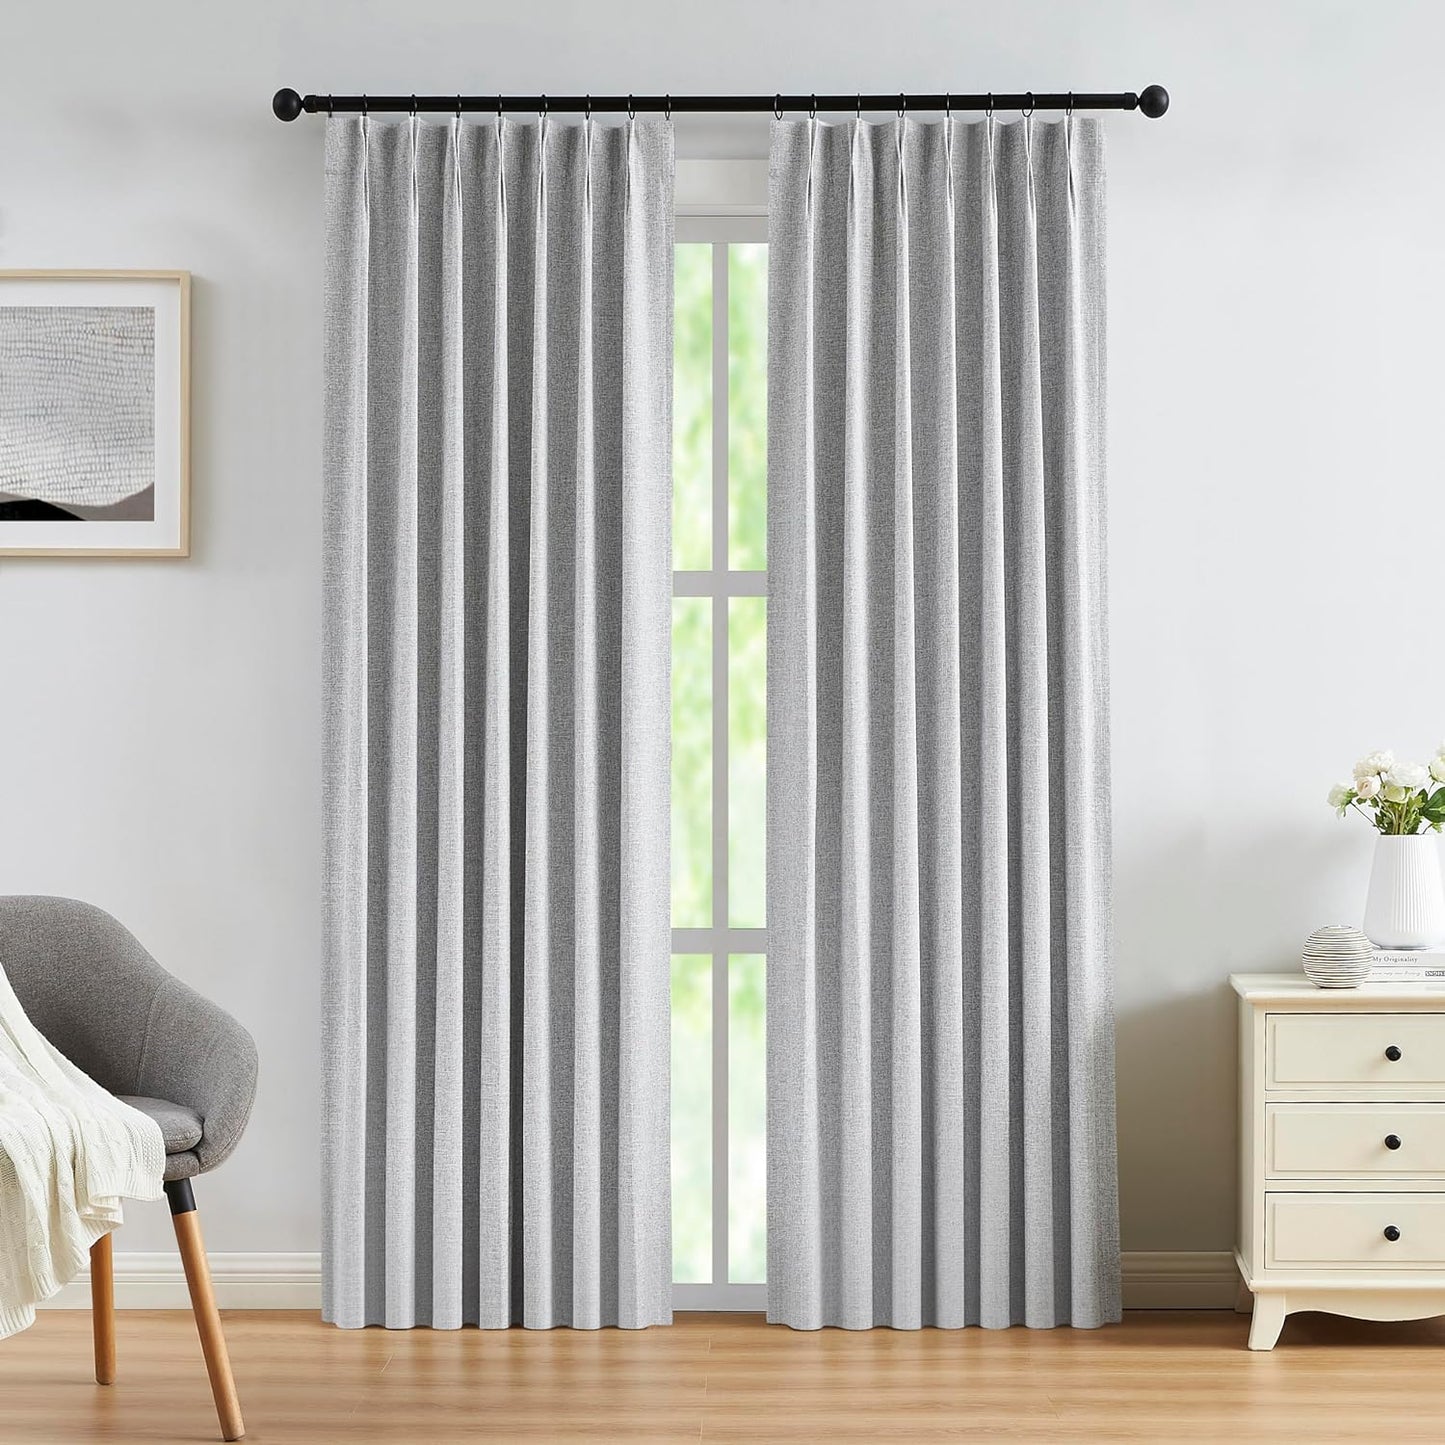 Kayne Studio Blended Linen Pinch Pleat Blackout Curtains 84 Inch Long for Living Room Bedroom,Thermal Insulated Window Treatments Pleated Drapes for Track with 9 Hooks,40"X84",Dark Linen,1 Panel  Kayne Studio Grey 40"X84"X1 